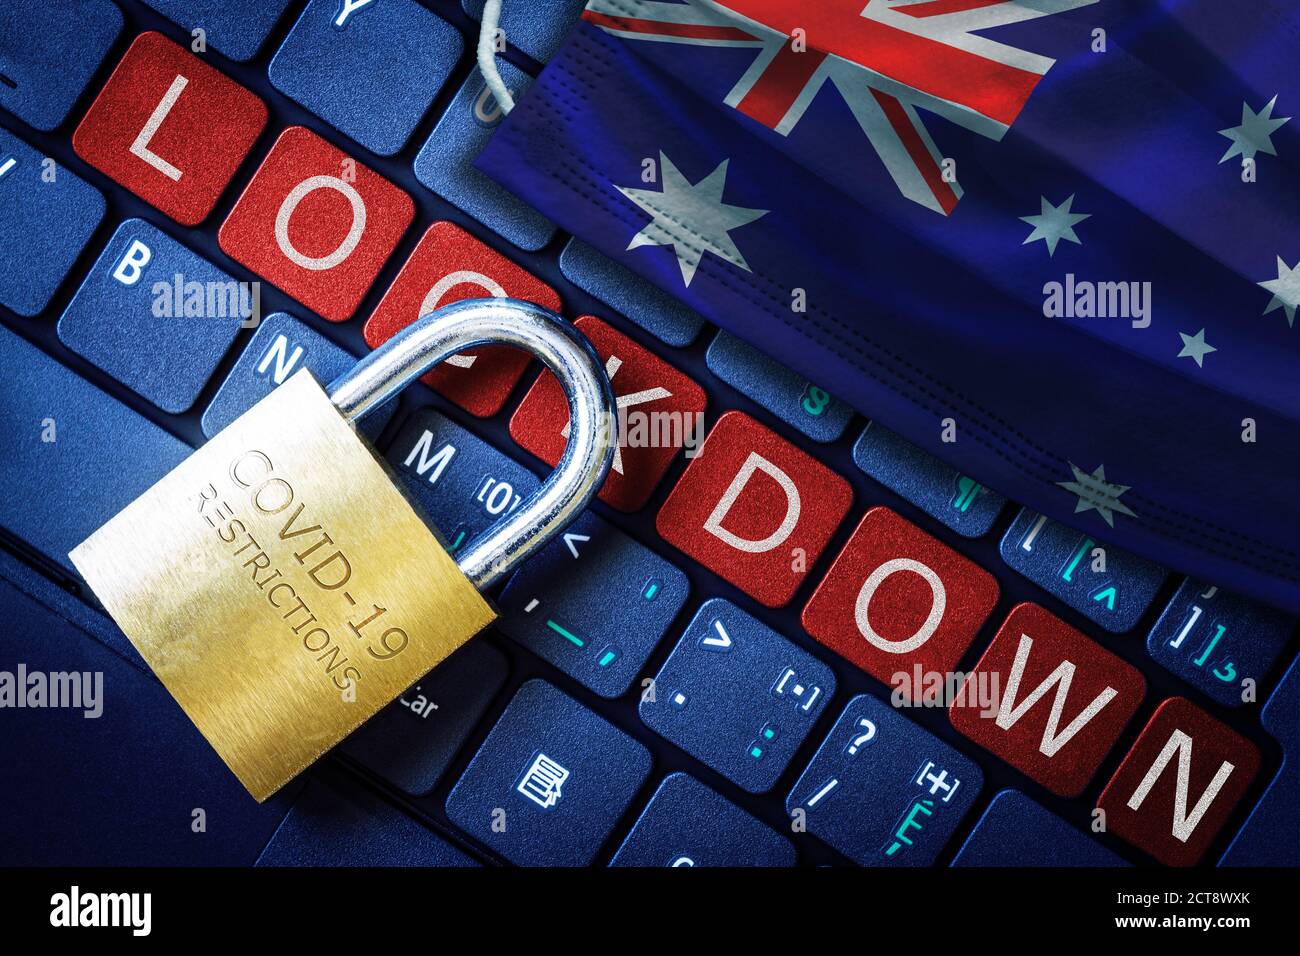 Australia COVID-19 coronavirus lockdown restrictions concept illustrated by padlock on laptop red alert keyboard buttons and face mask with Australian Stock Photo